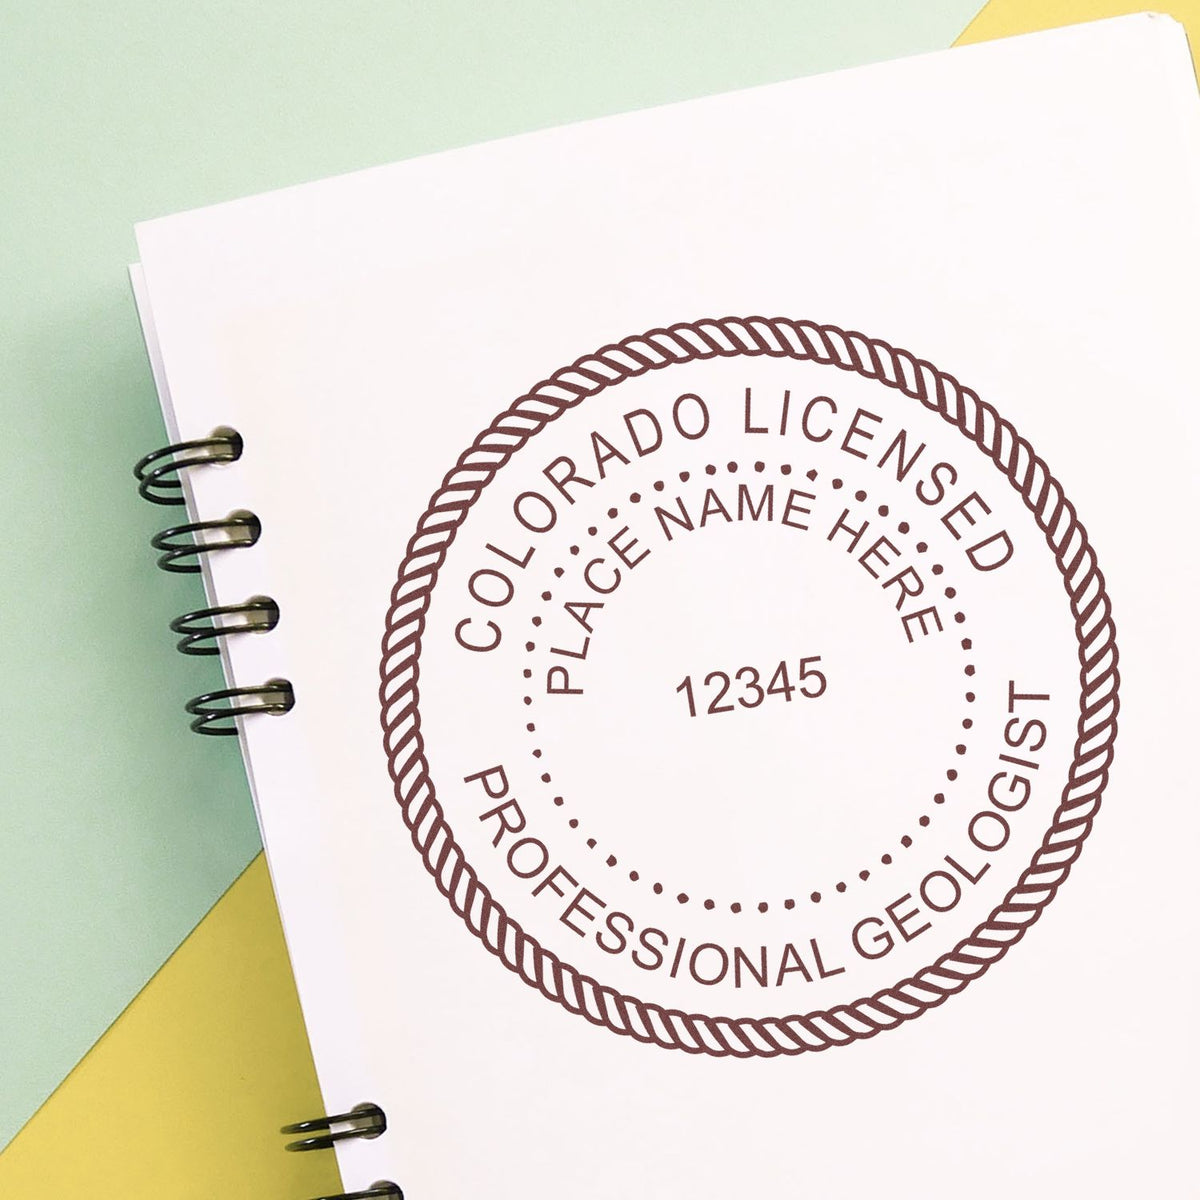 Another Example of a stamped impression of the Colorado Professional Geologist Seal Stamp on a office form